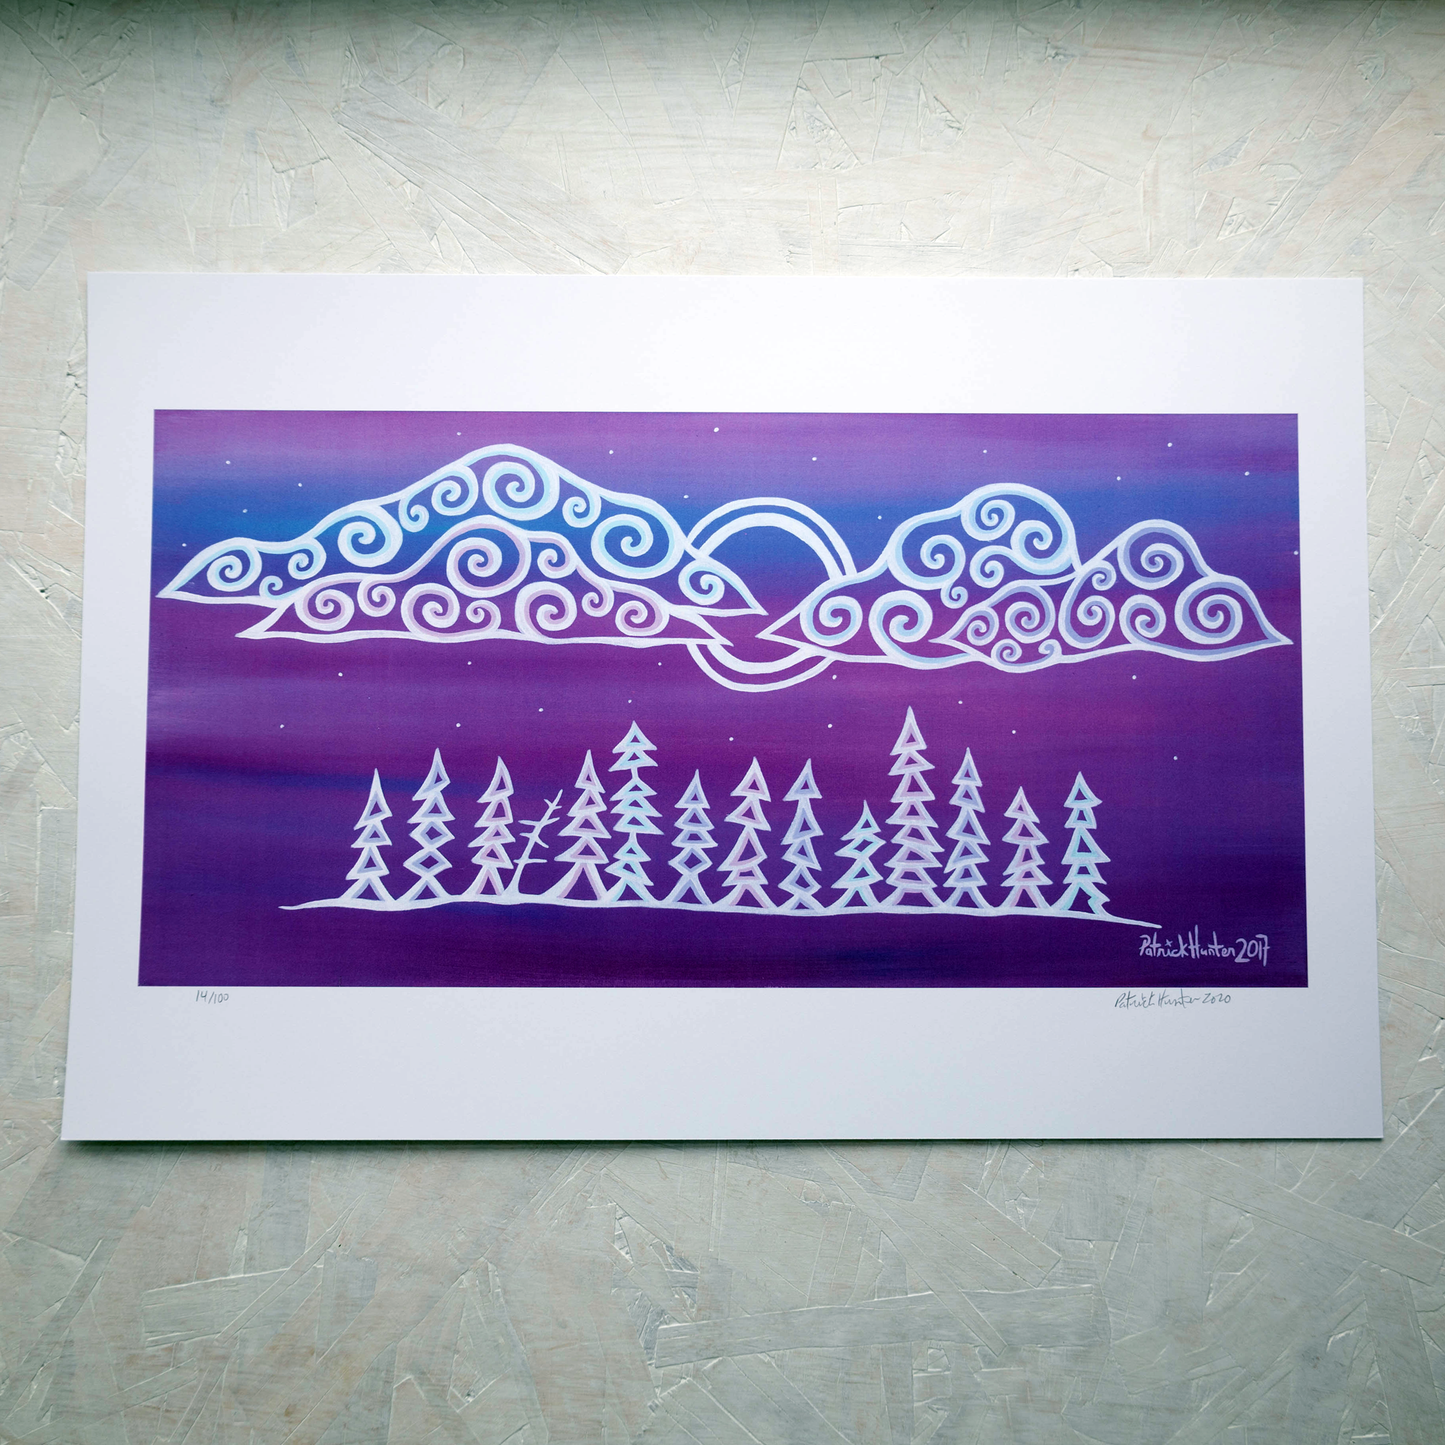 Print of Patrick Hunter's painting of a winter scene against deep purple sky, woodland art style.